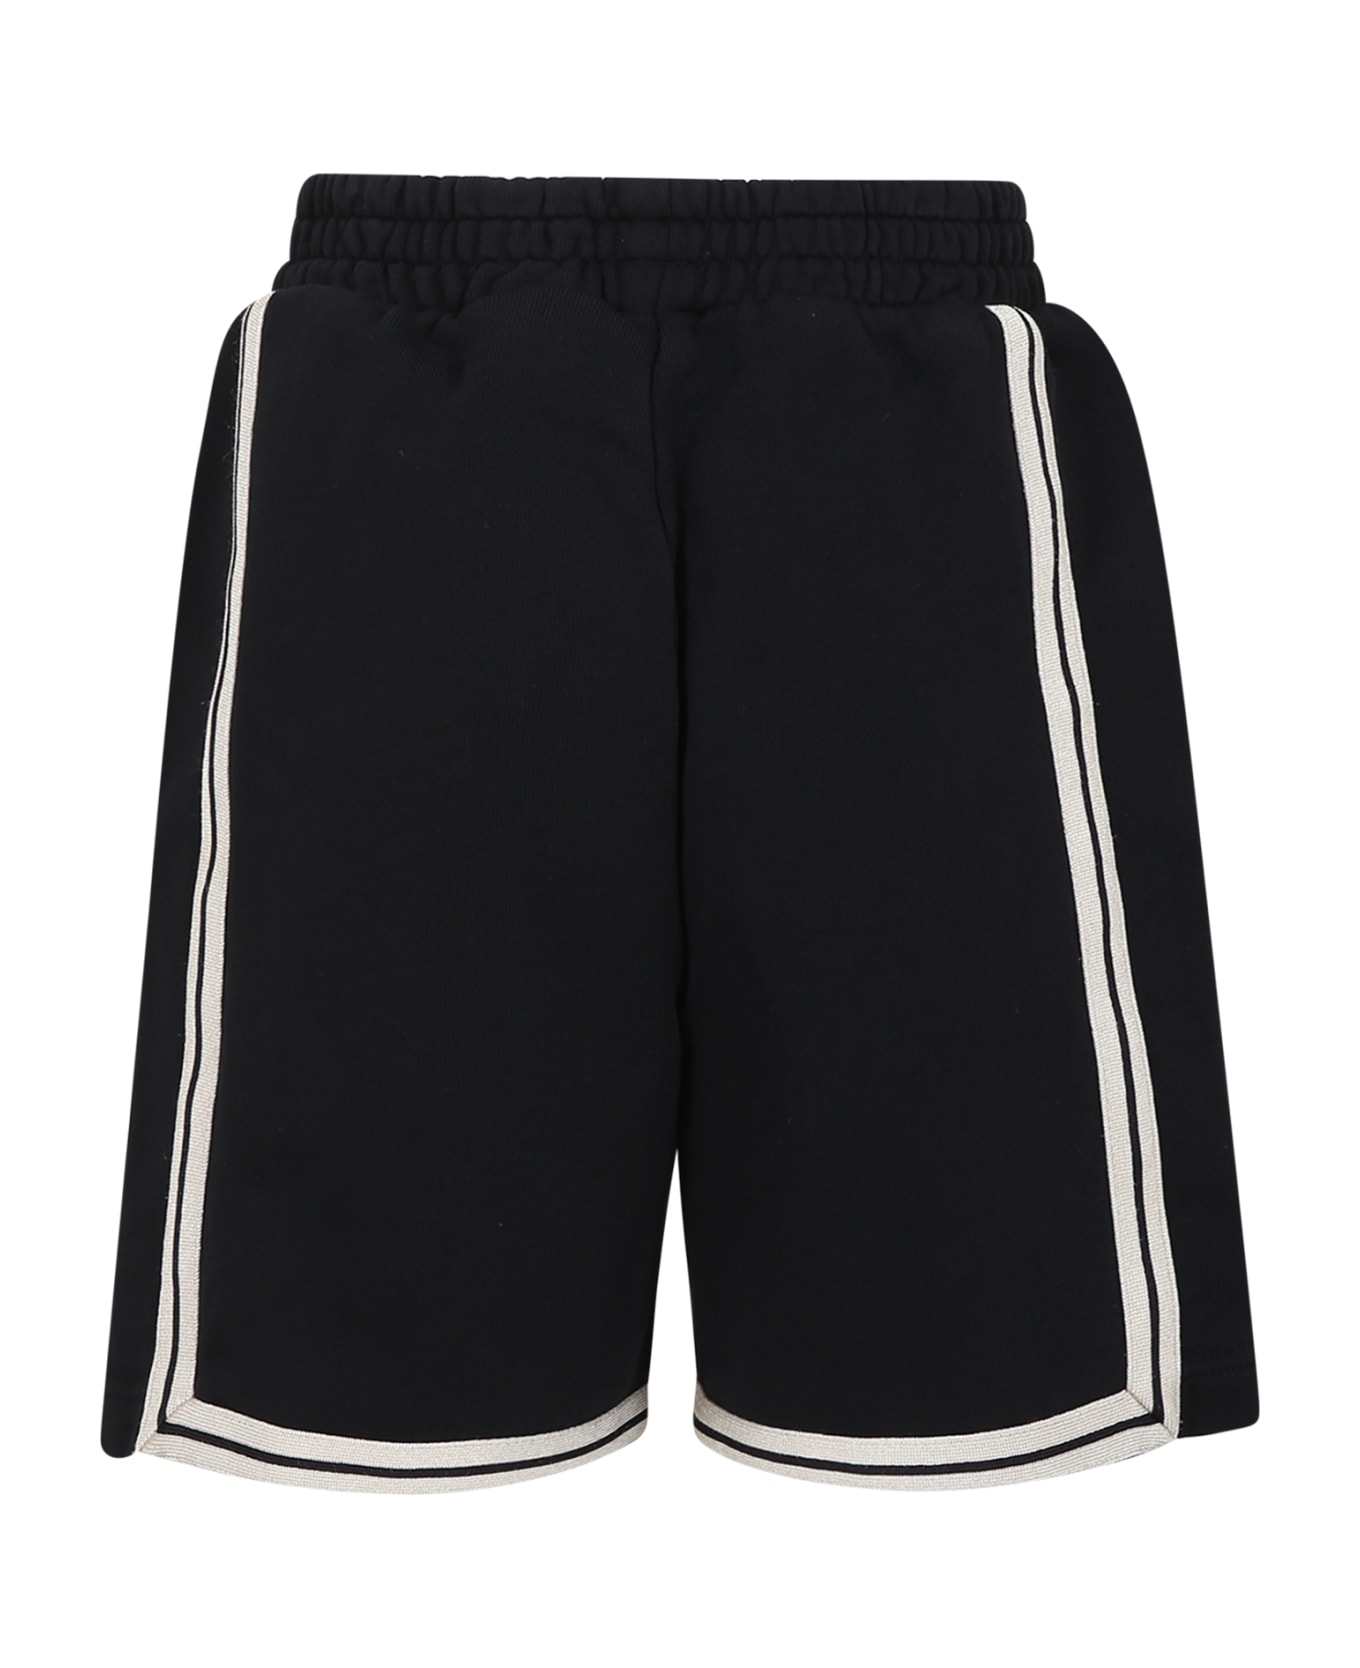 Palm Angels Black Trousers For Boy With Logo - BLACK/NEUTRALS